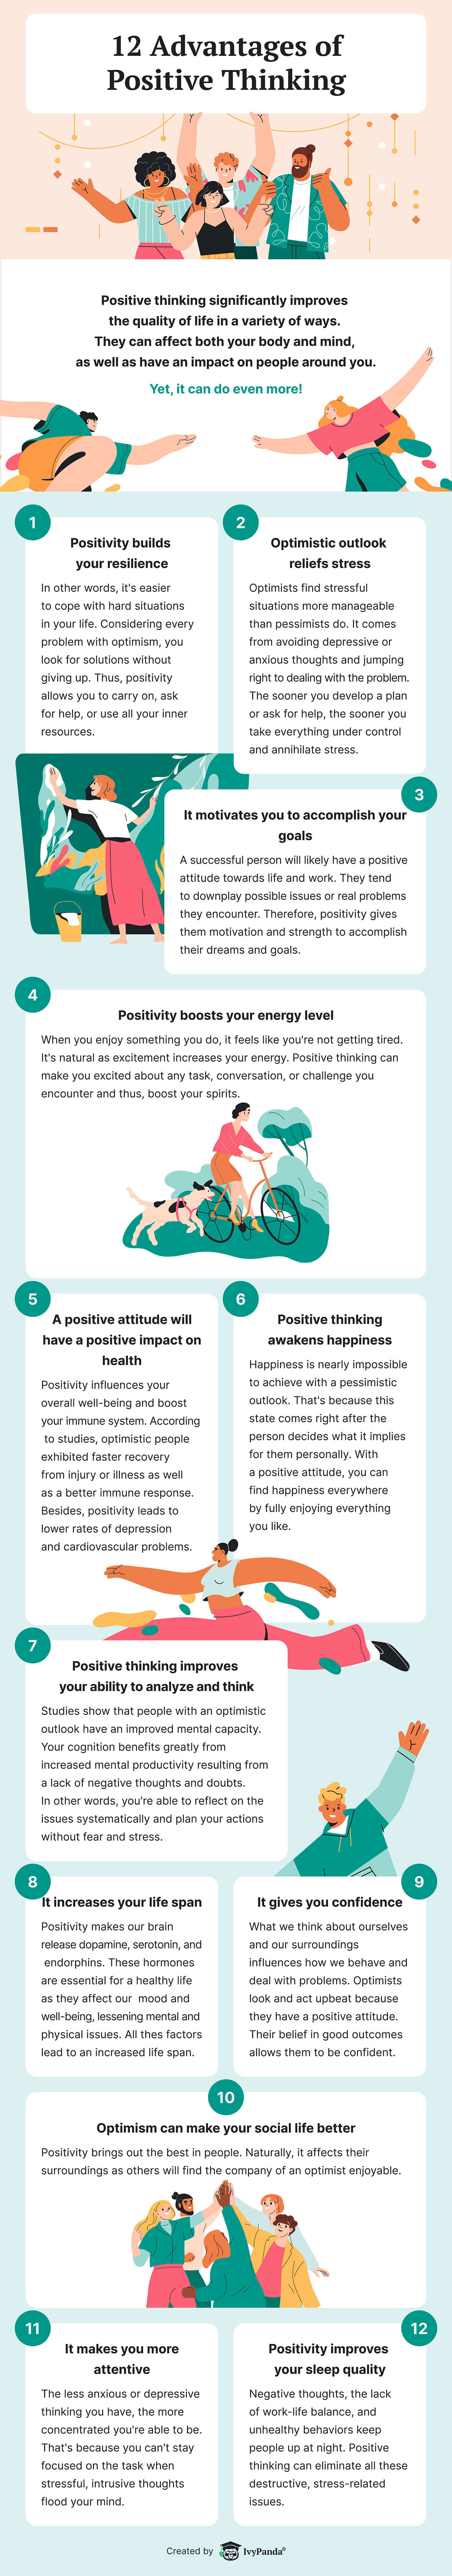 12 Advantages of Positive Thinking